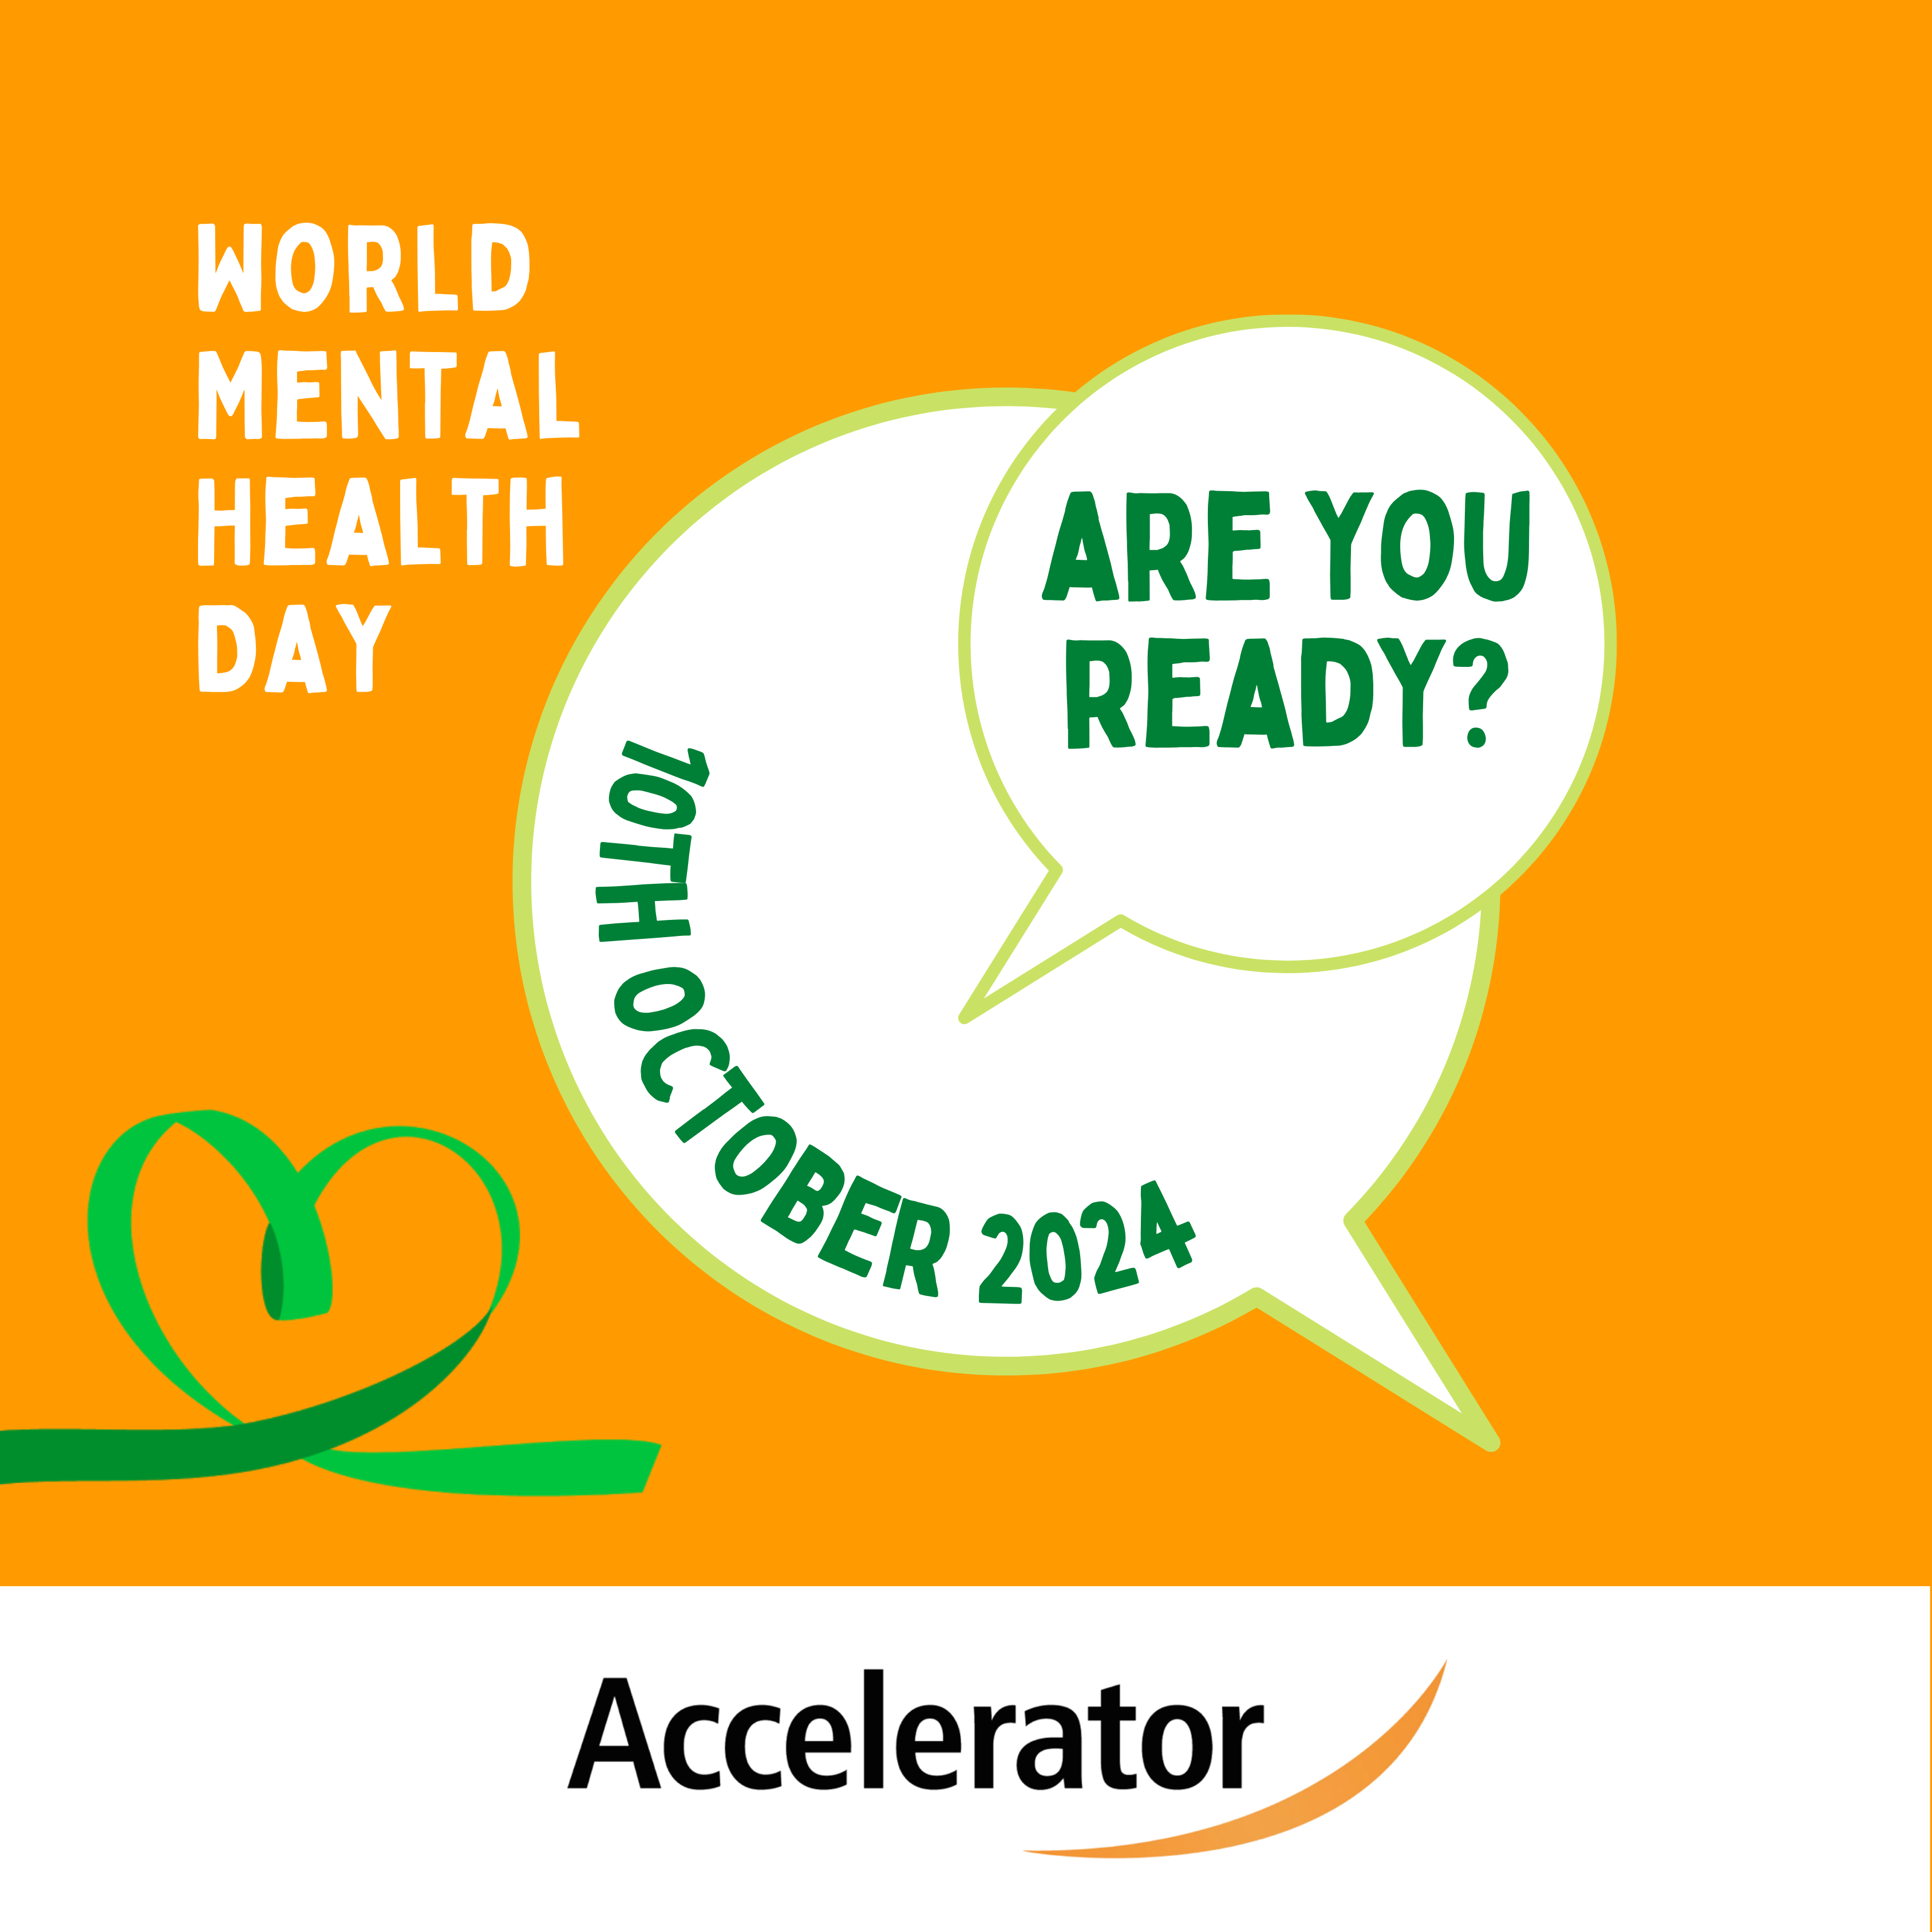 World Mental Health Day is fast approaching - are you prepared?